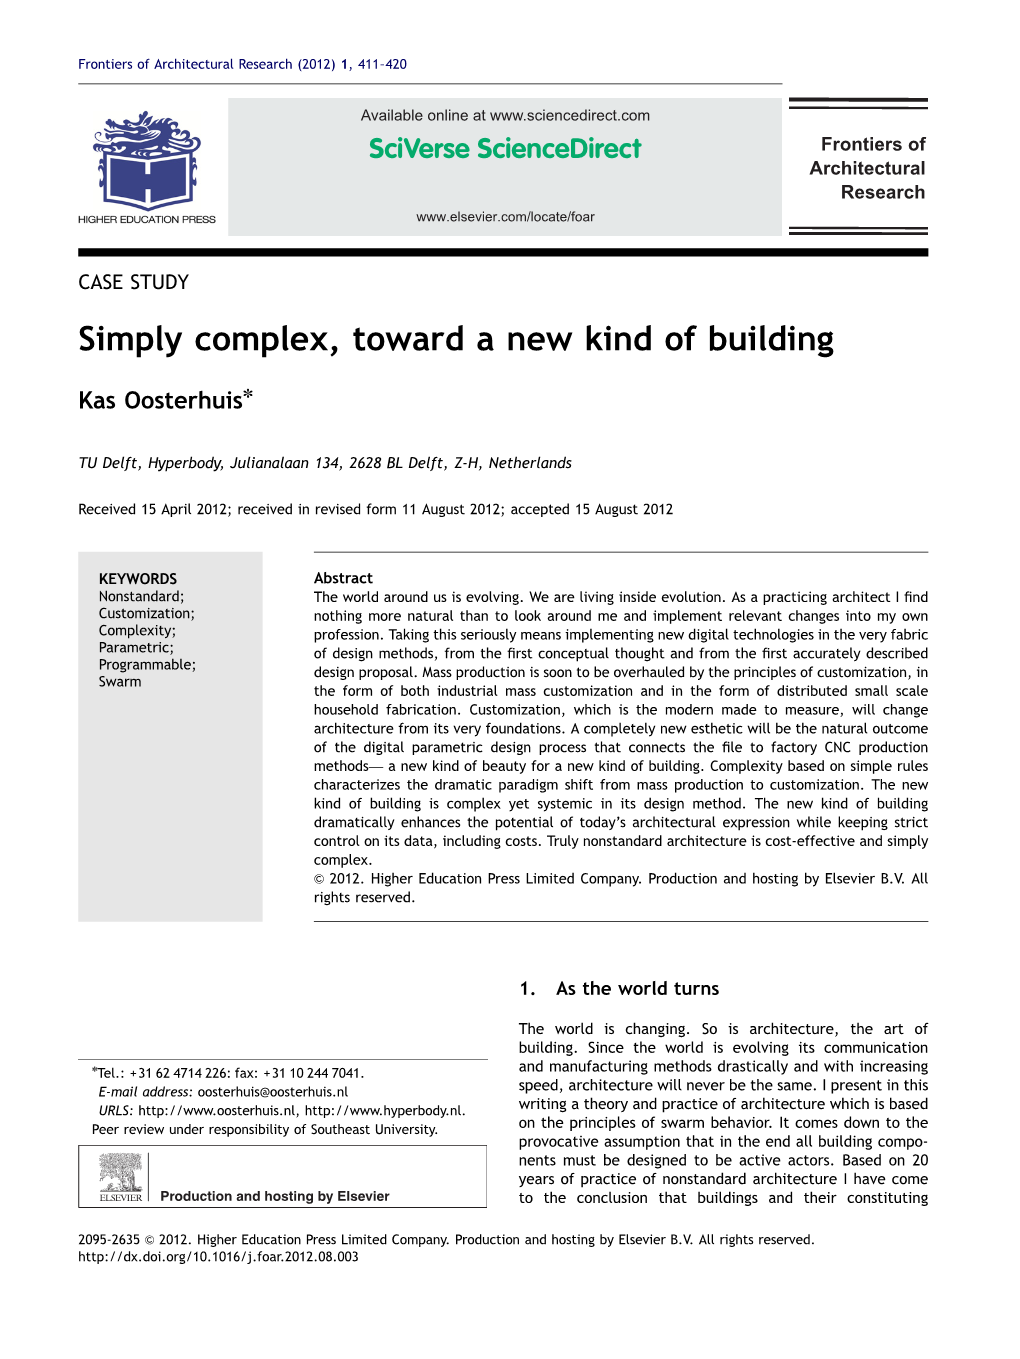 Simply Complex, Toward a New Kind of Building